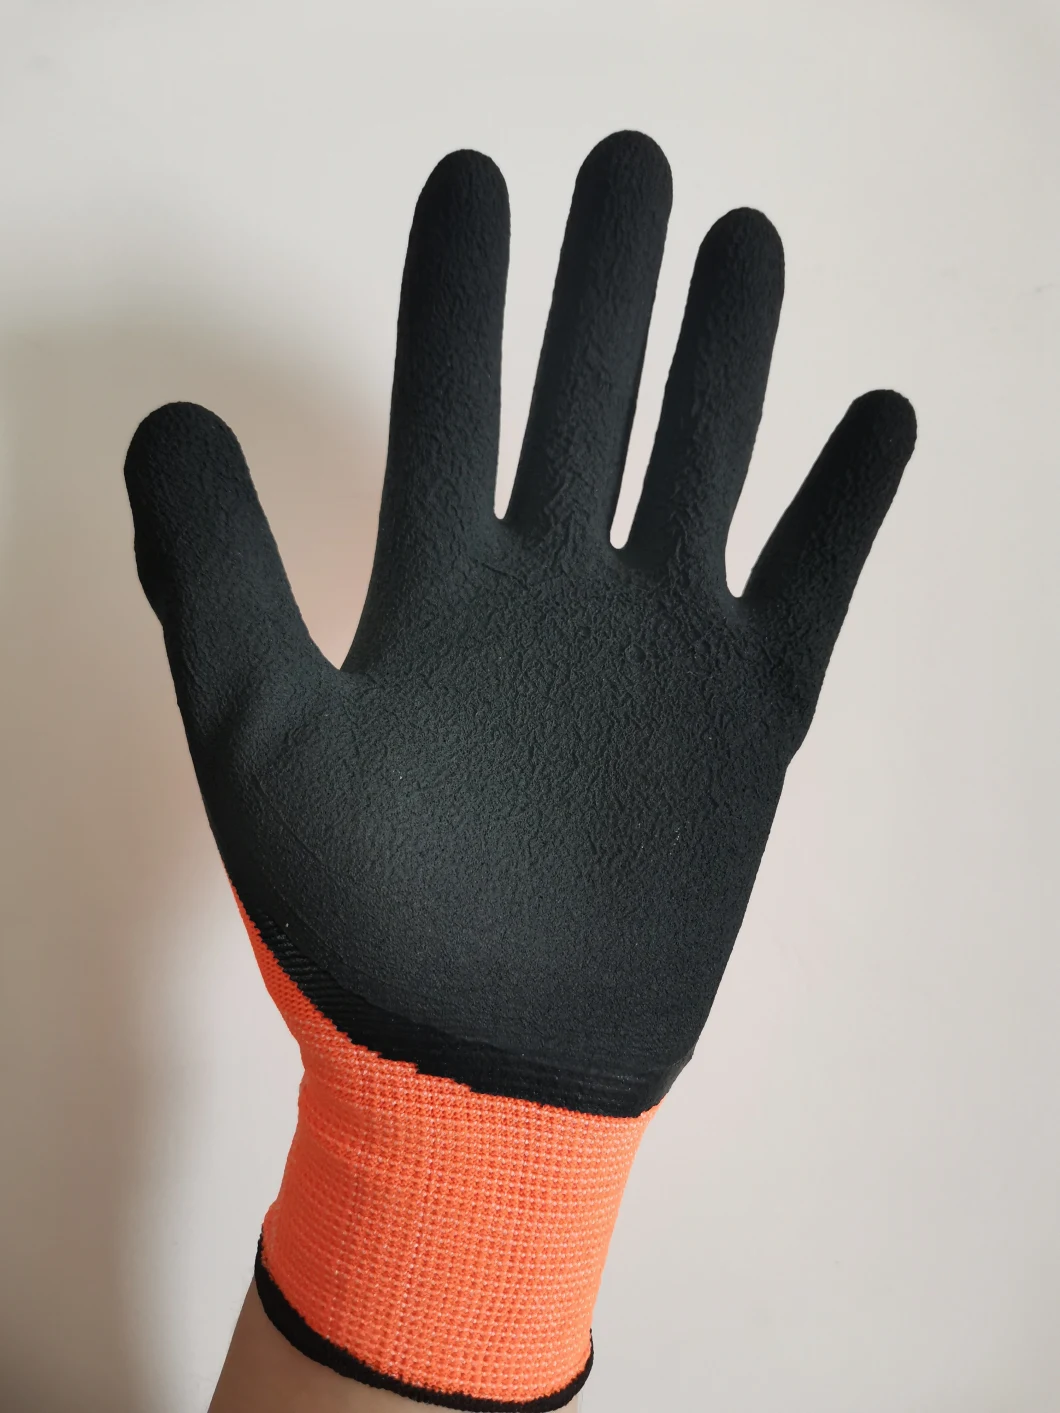 PVC Dotted Rubber Dotted Cotton Gloves/Work Gloves /Safety Gloves/Labor Gloves